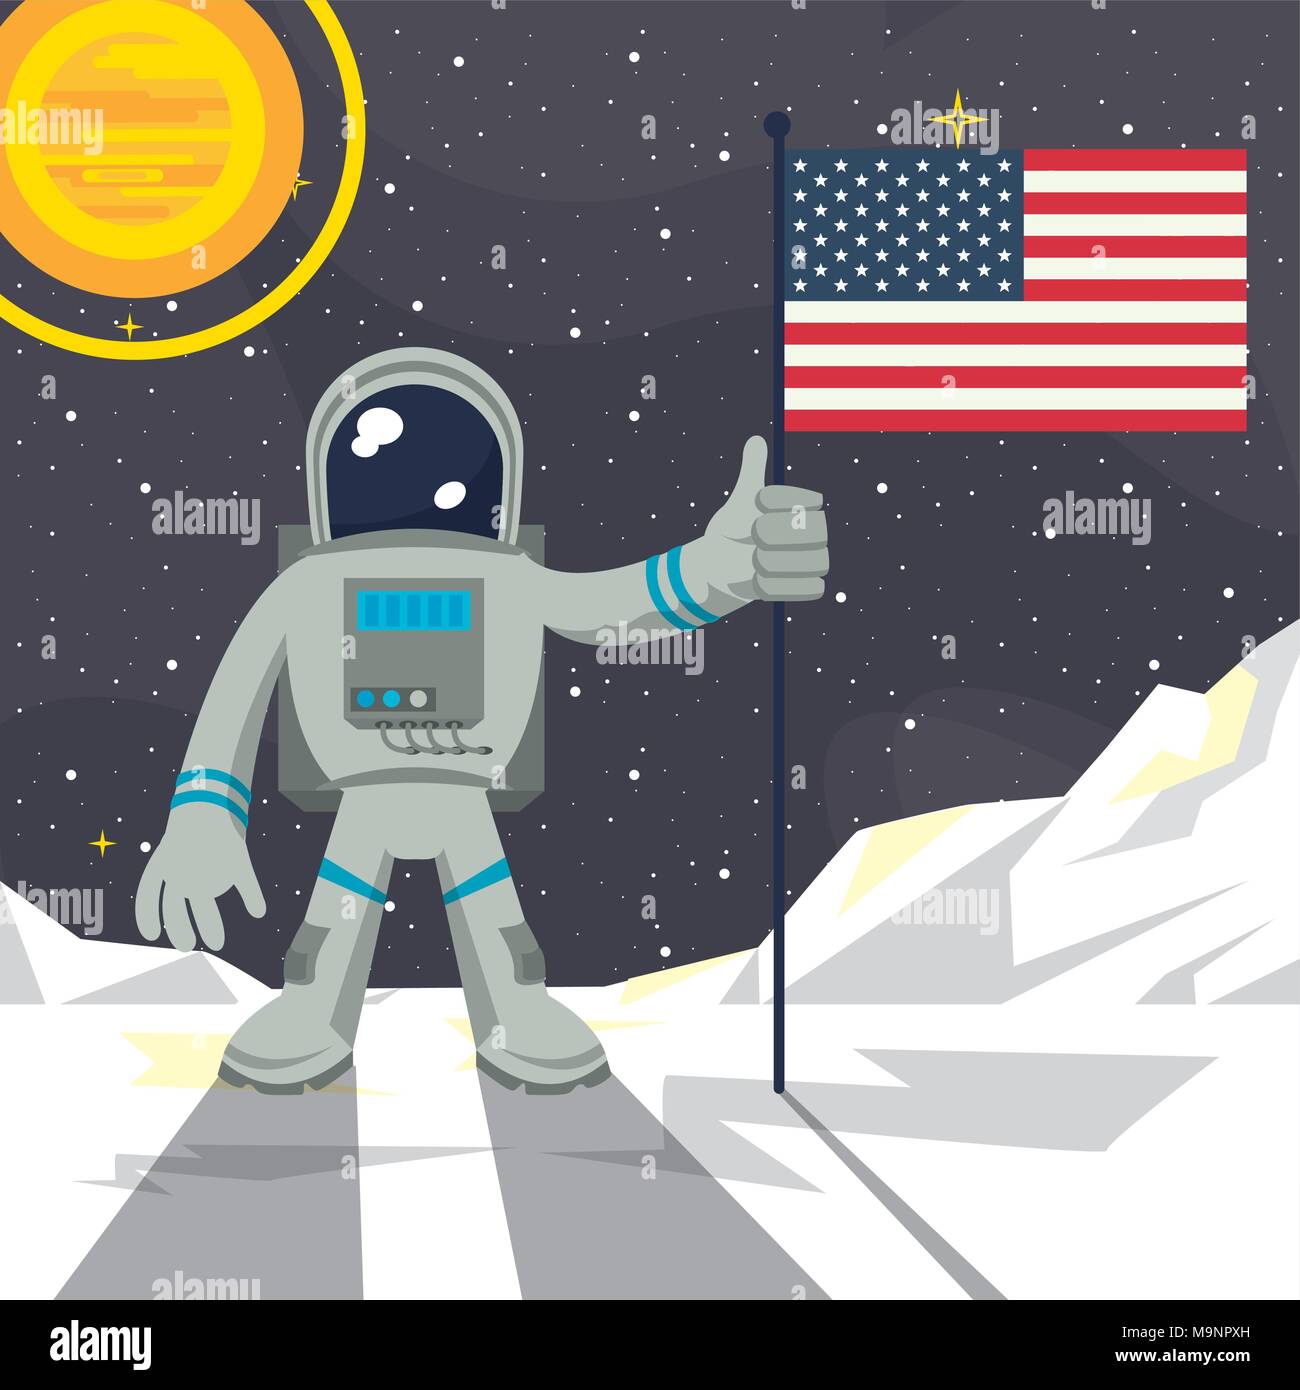 Astronaut in the moon nailing USA flag Stock Vector